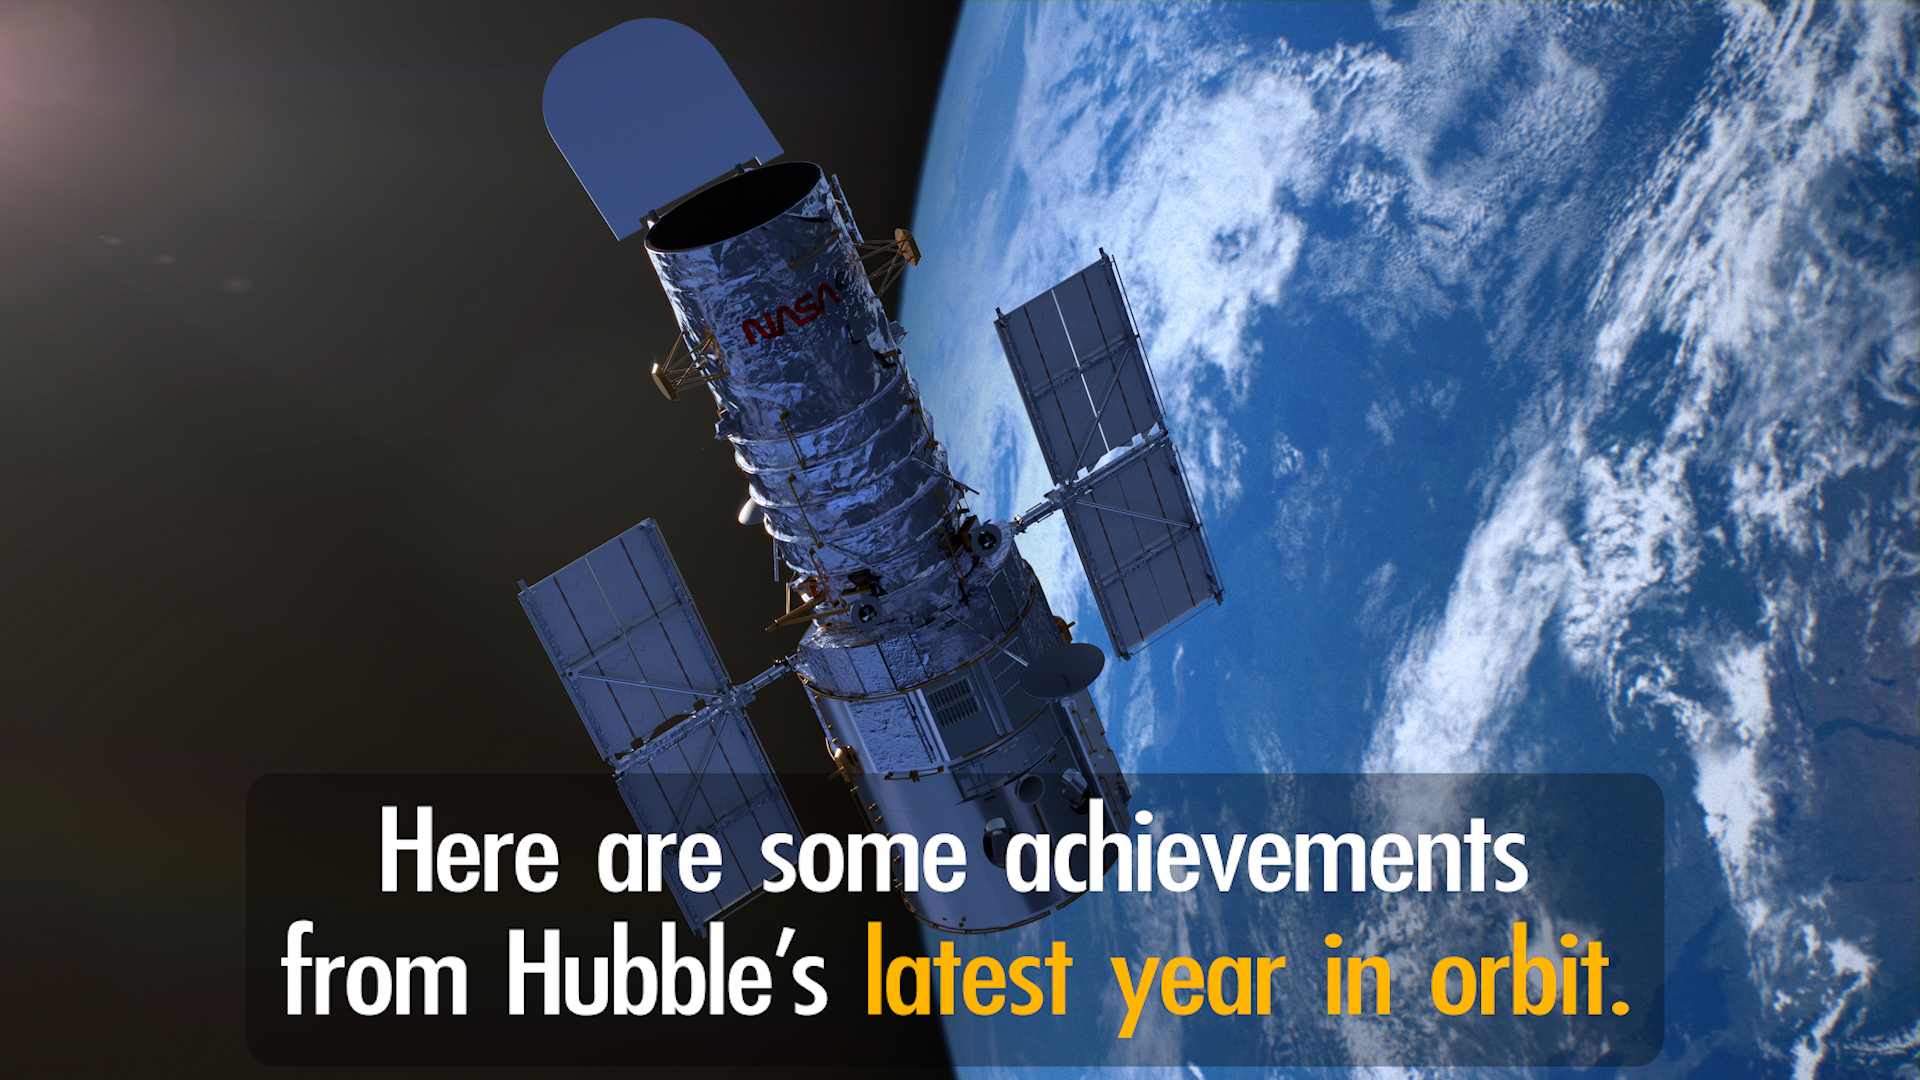 Preview Image for Hubble’s 30th Year in Orbit